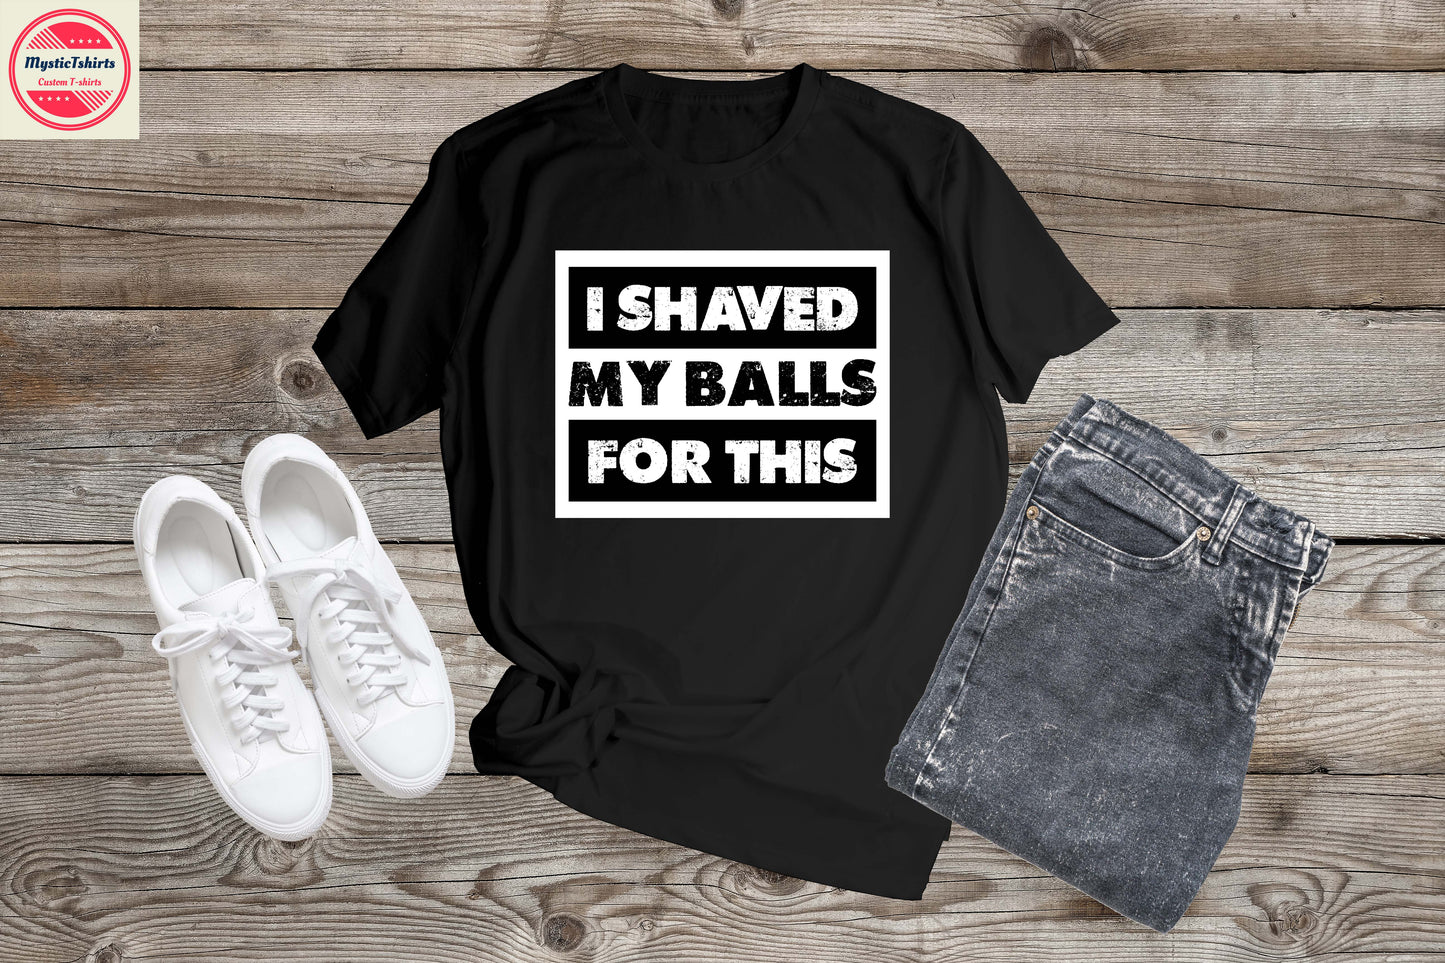 221. I SHAVED MY BALLS FOR THIS, Custom Made Shirt, Personalized T-Shirt, Custom Text, Make Your Own Shirt, Custom Tee